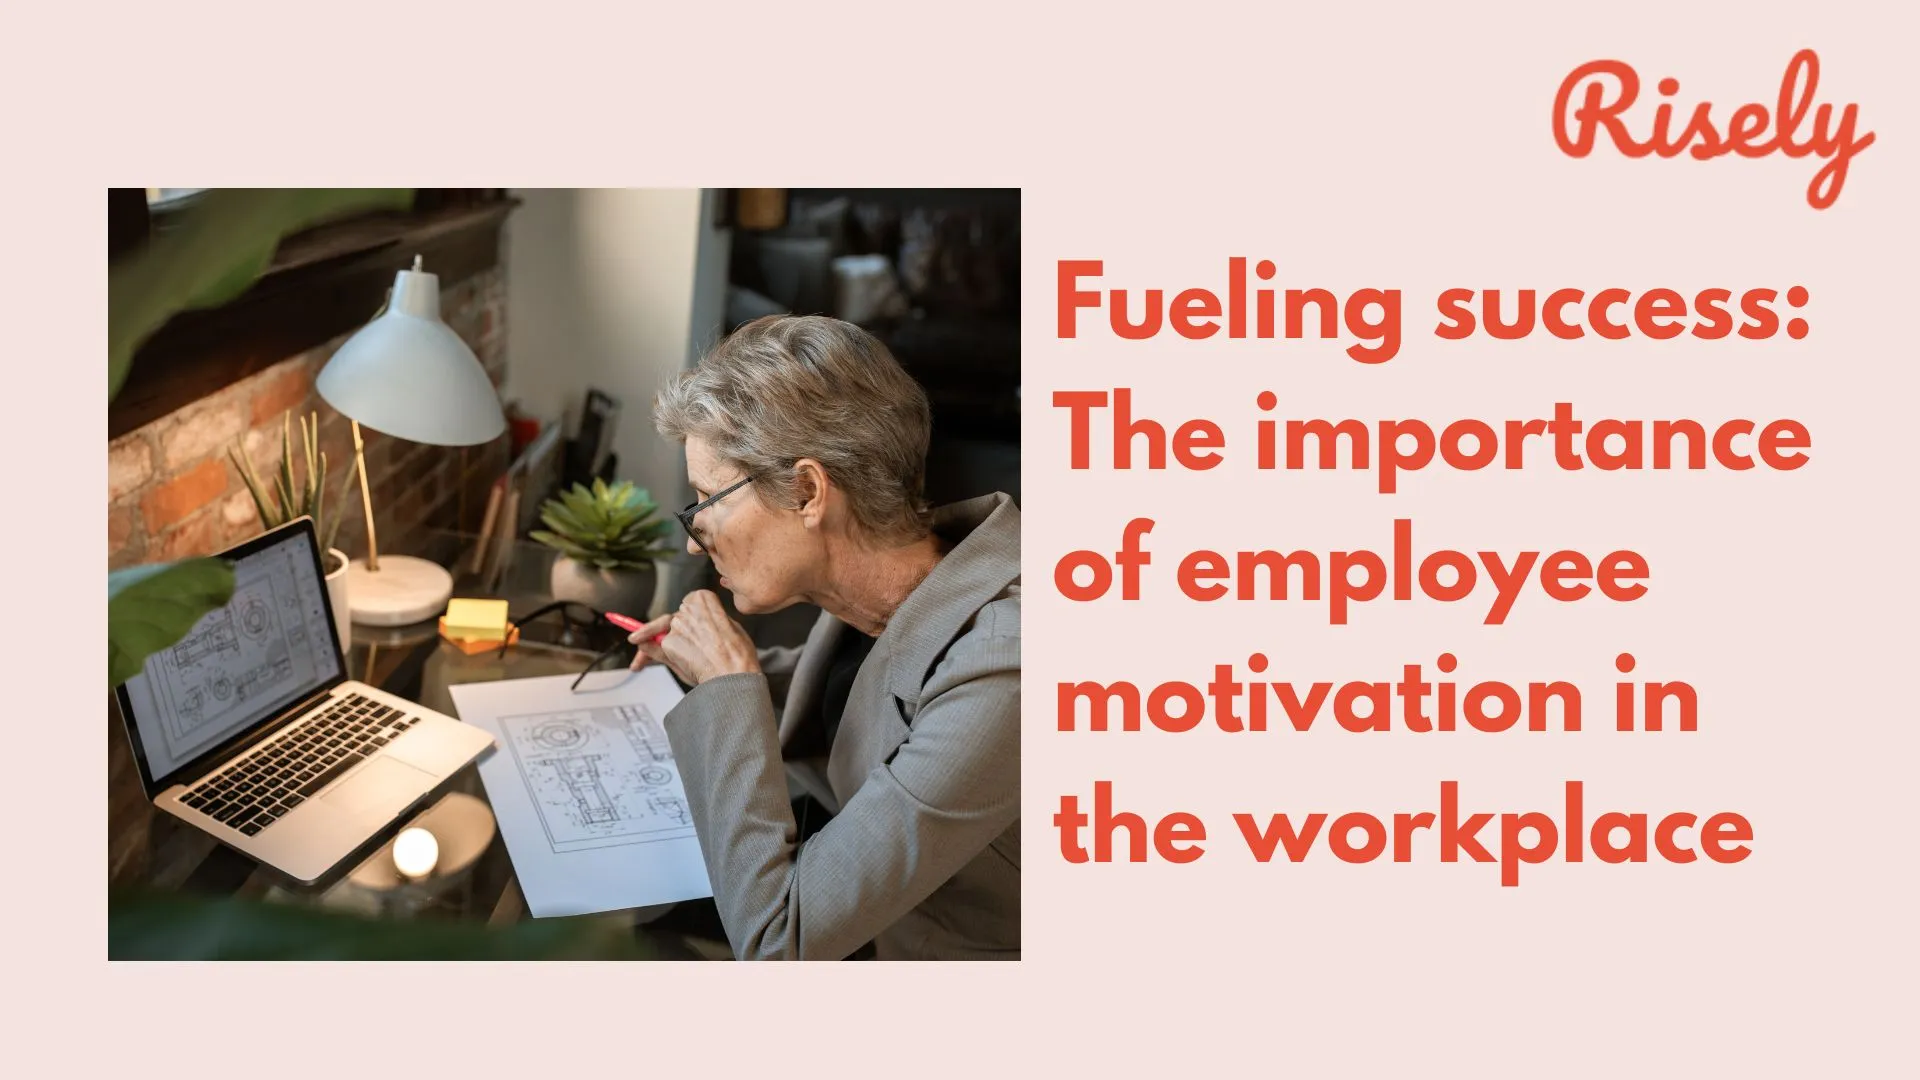 Fueling success: The importance of employee motivation in the workplace